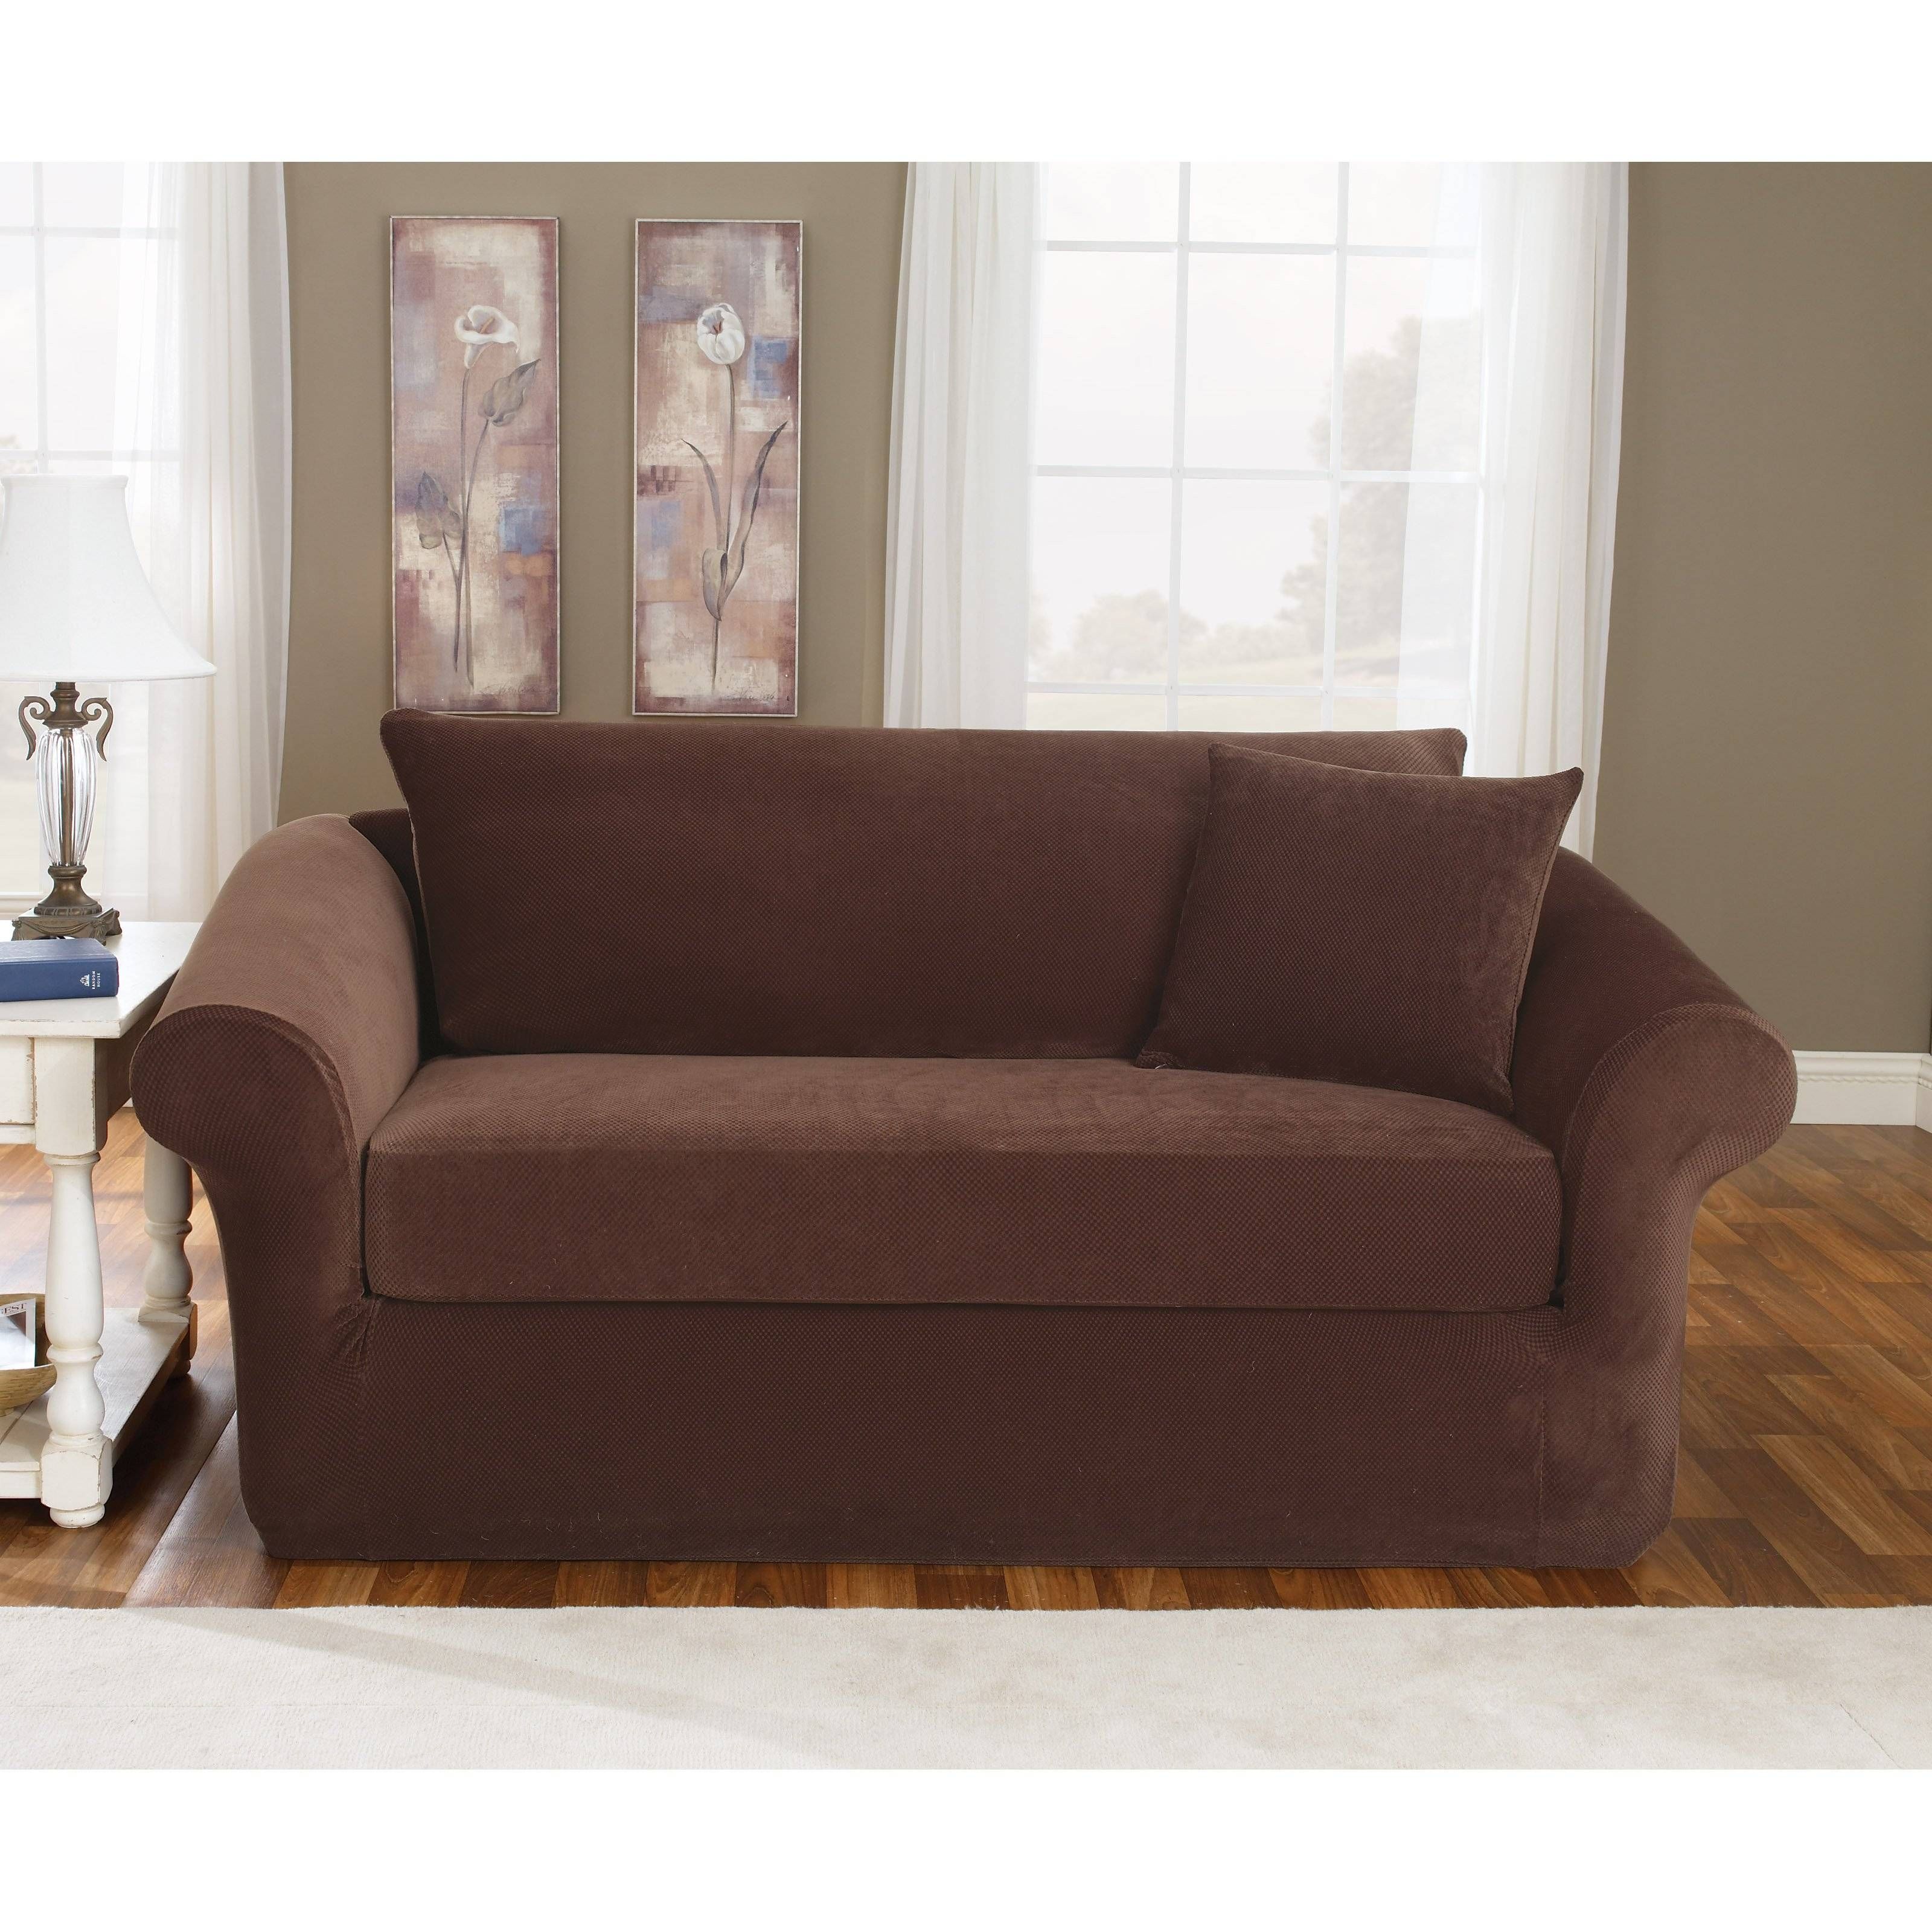 Furniture: Cool Stretch Sofa Covers To Protect And Renew Your Sofa Inside Stretch Slipcovers For Sofas (View 10 of 15)